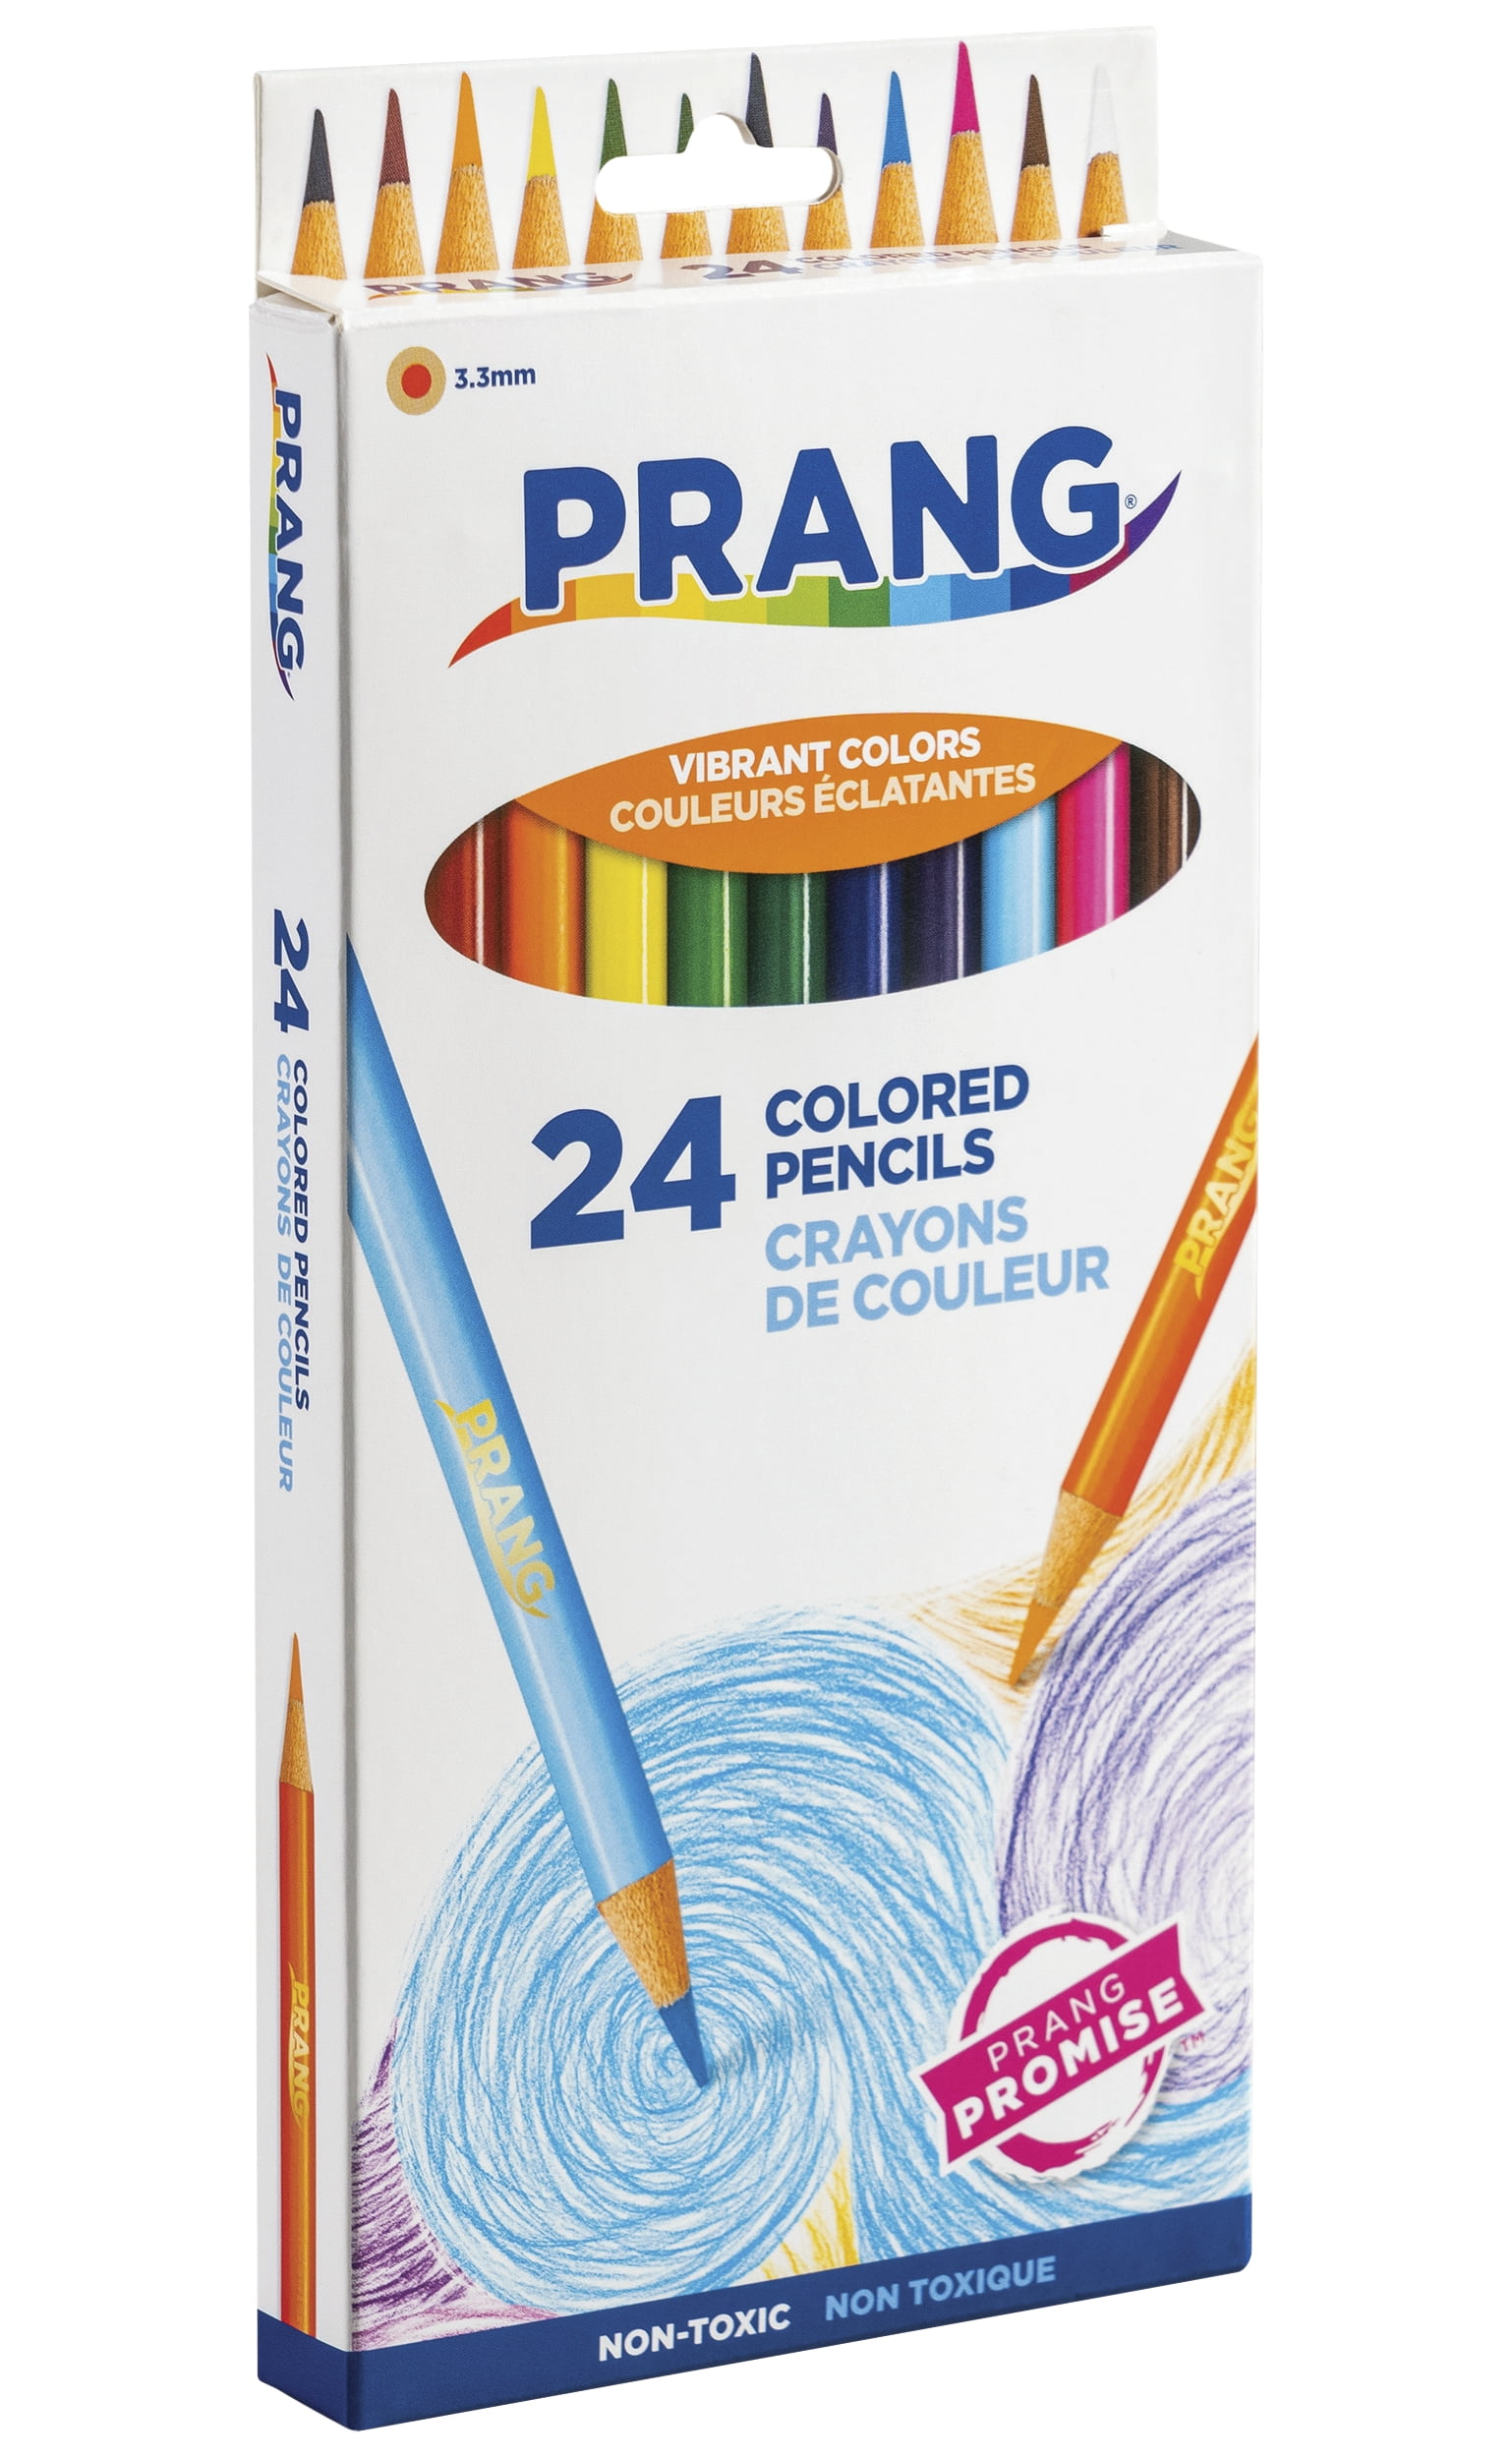 150 Colored Pencil Mega Set with Storage Tin - Ultra-Smooth Artist